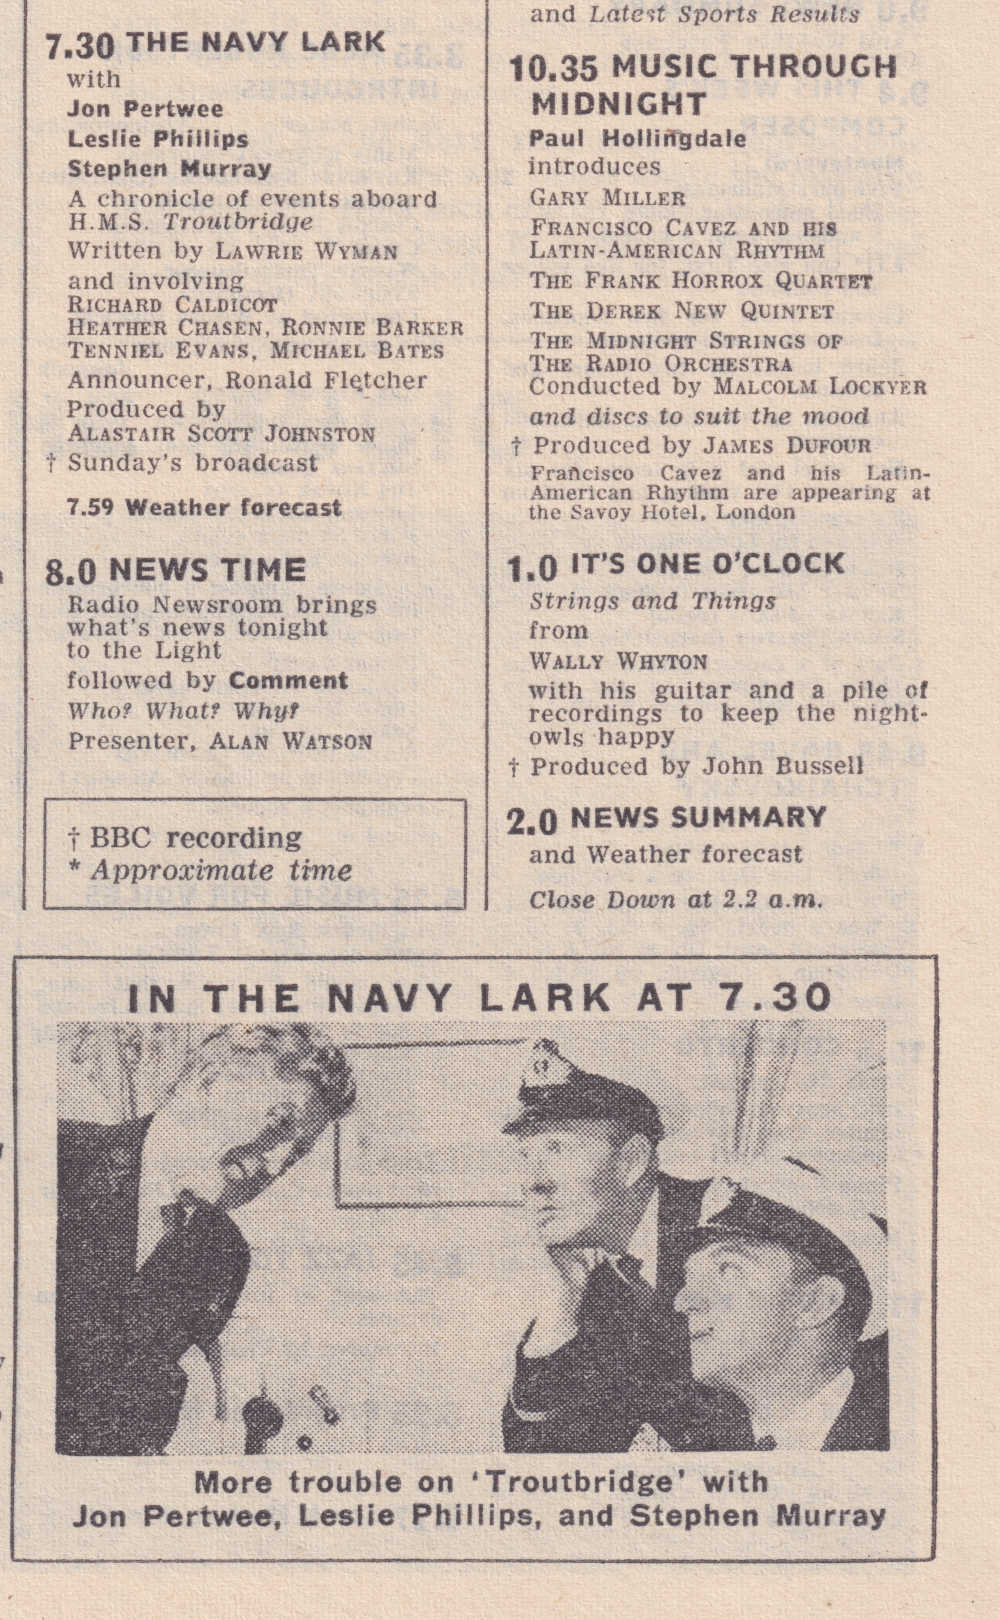 The Navy Lark Episode Listing and Photo